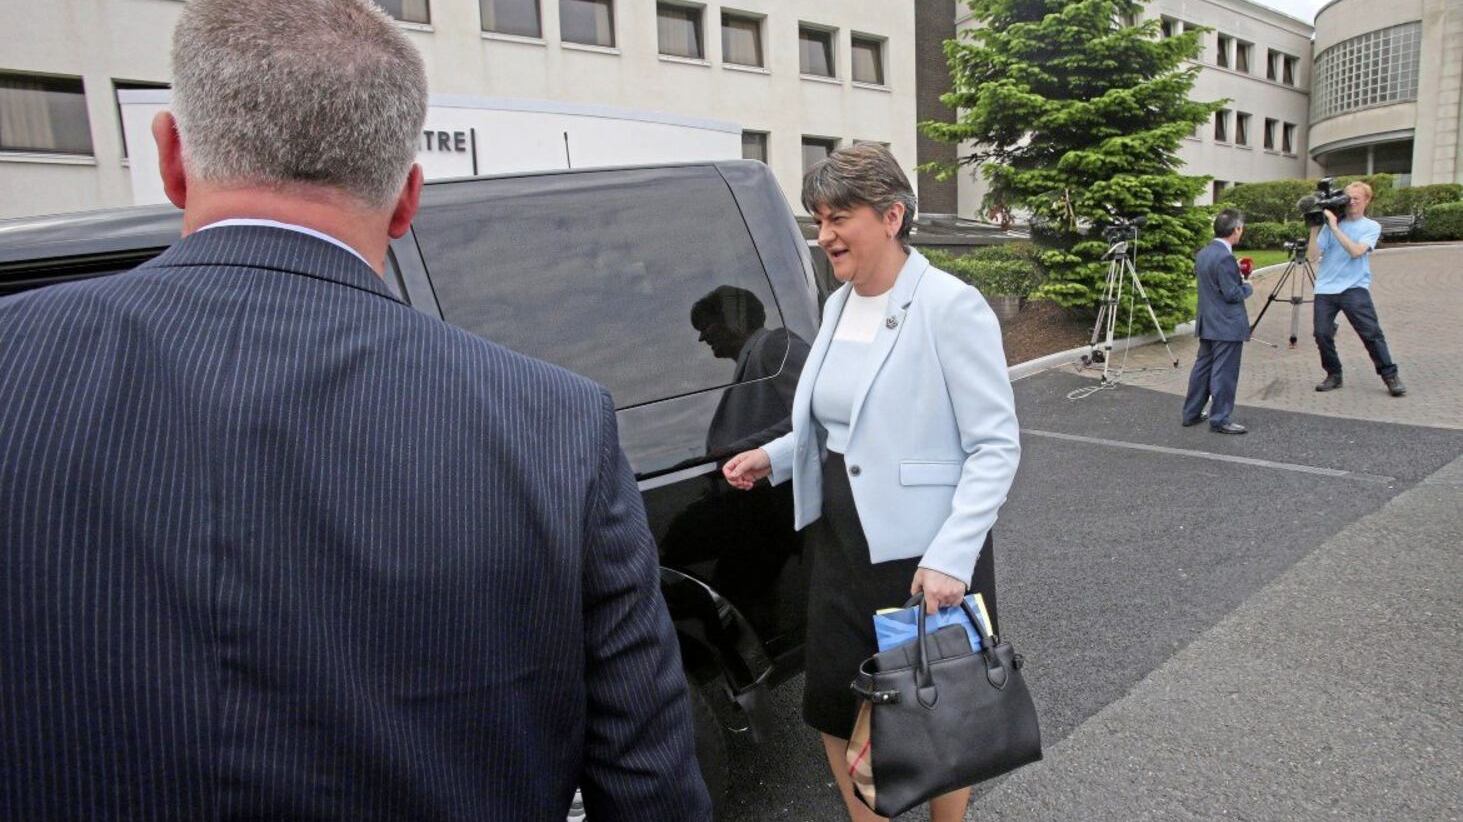 DUP leader Arlene Foster leaves the Stormont Hotel, the party will now go into a partnership government with the Conservatives. Picture Mal McCann. 